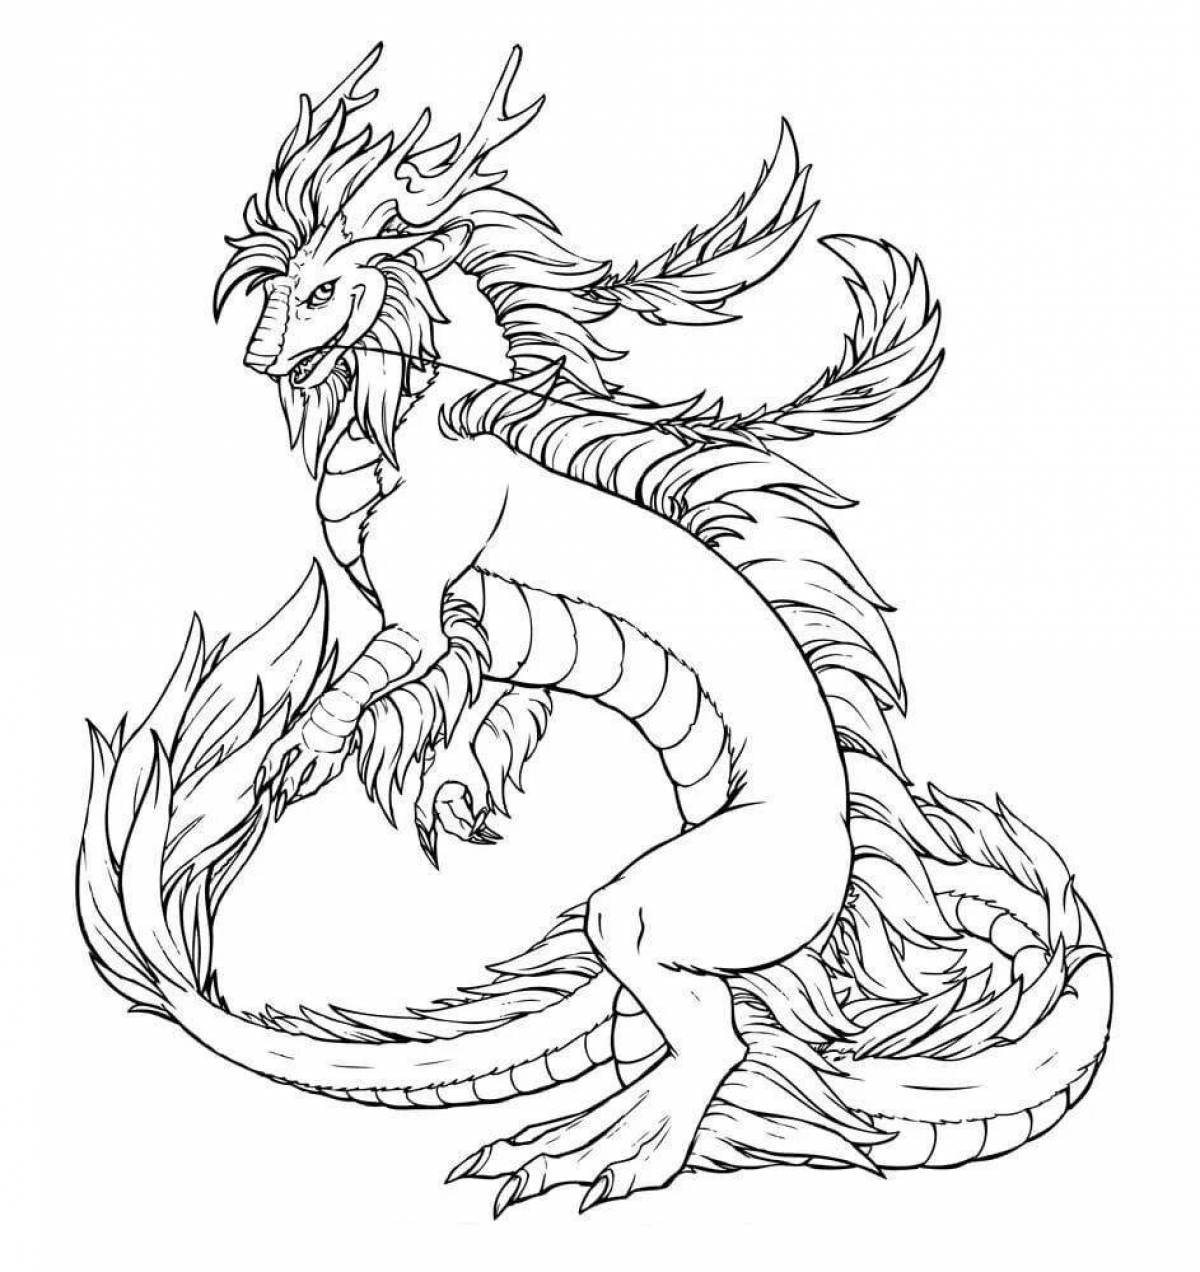 Exciting water dragon coloring book